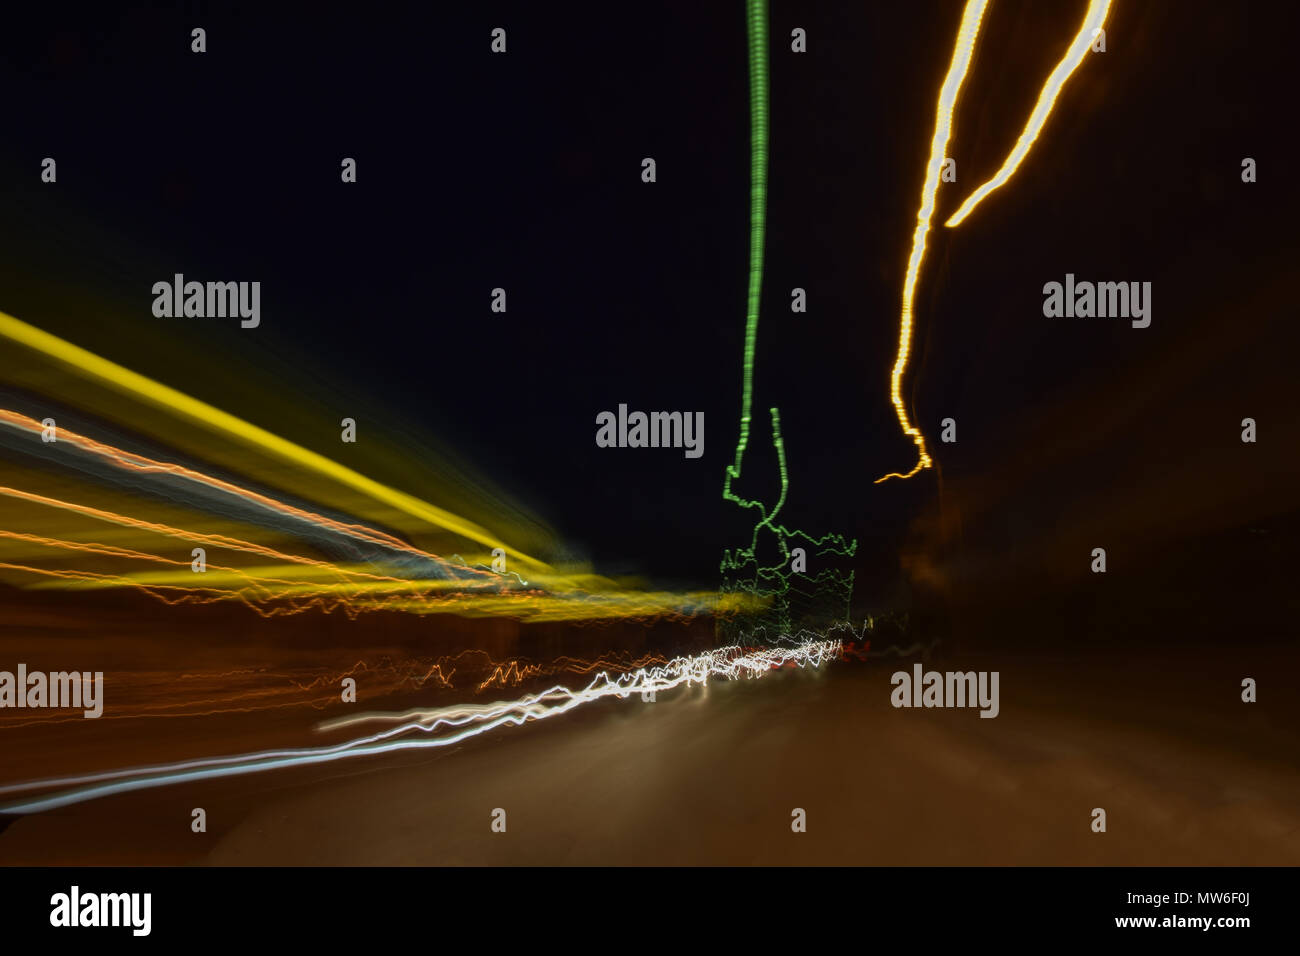 abstract image of street lights by night Stock Photo